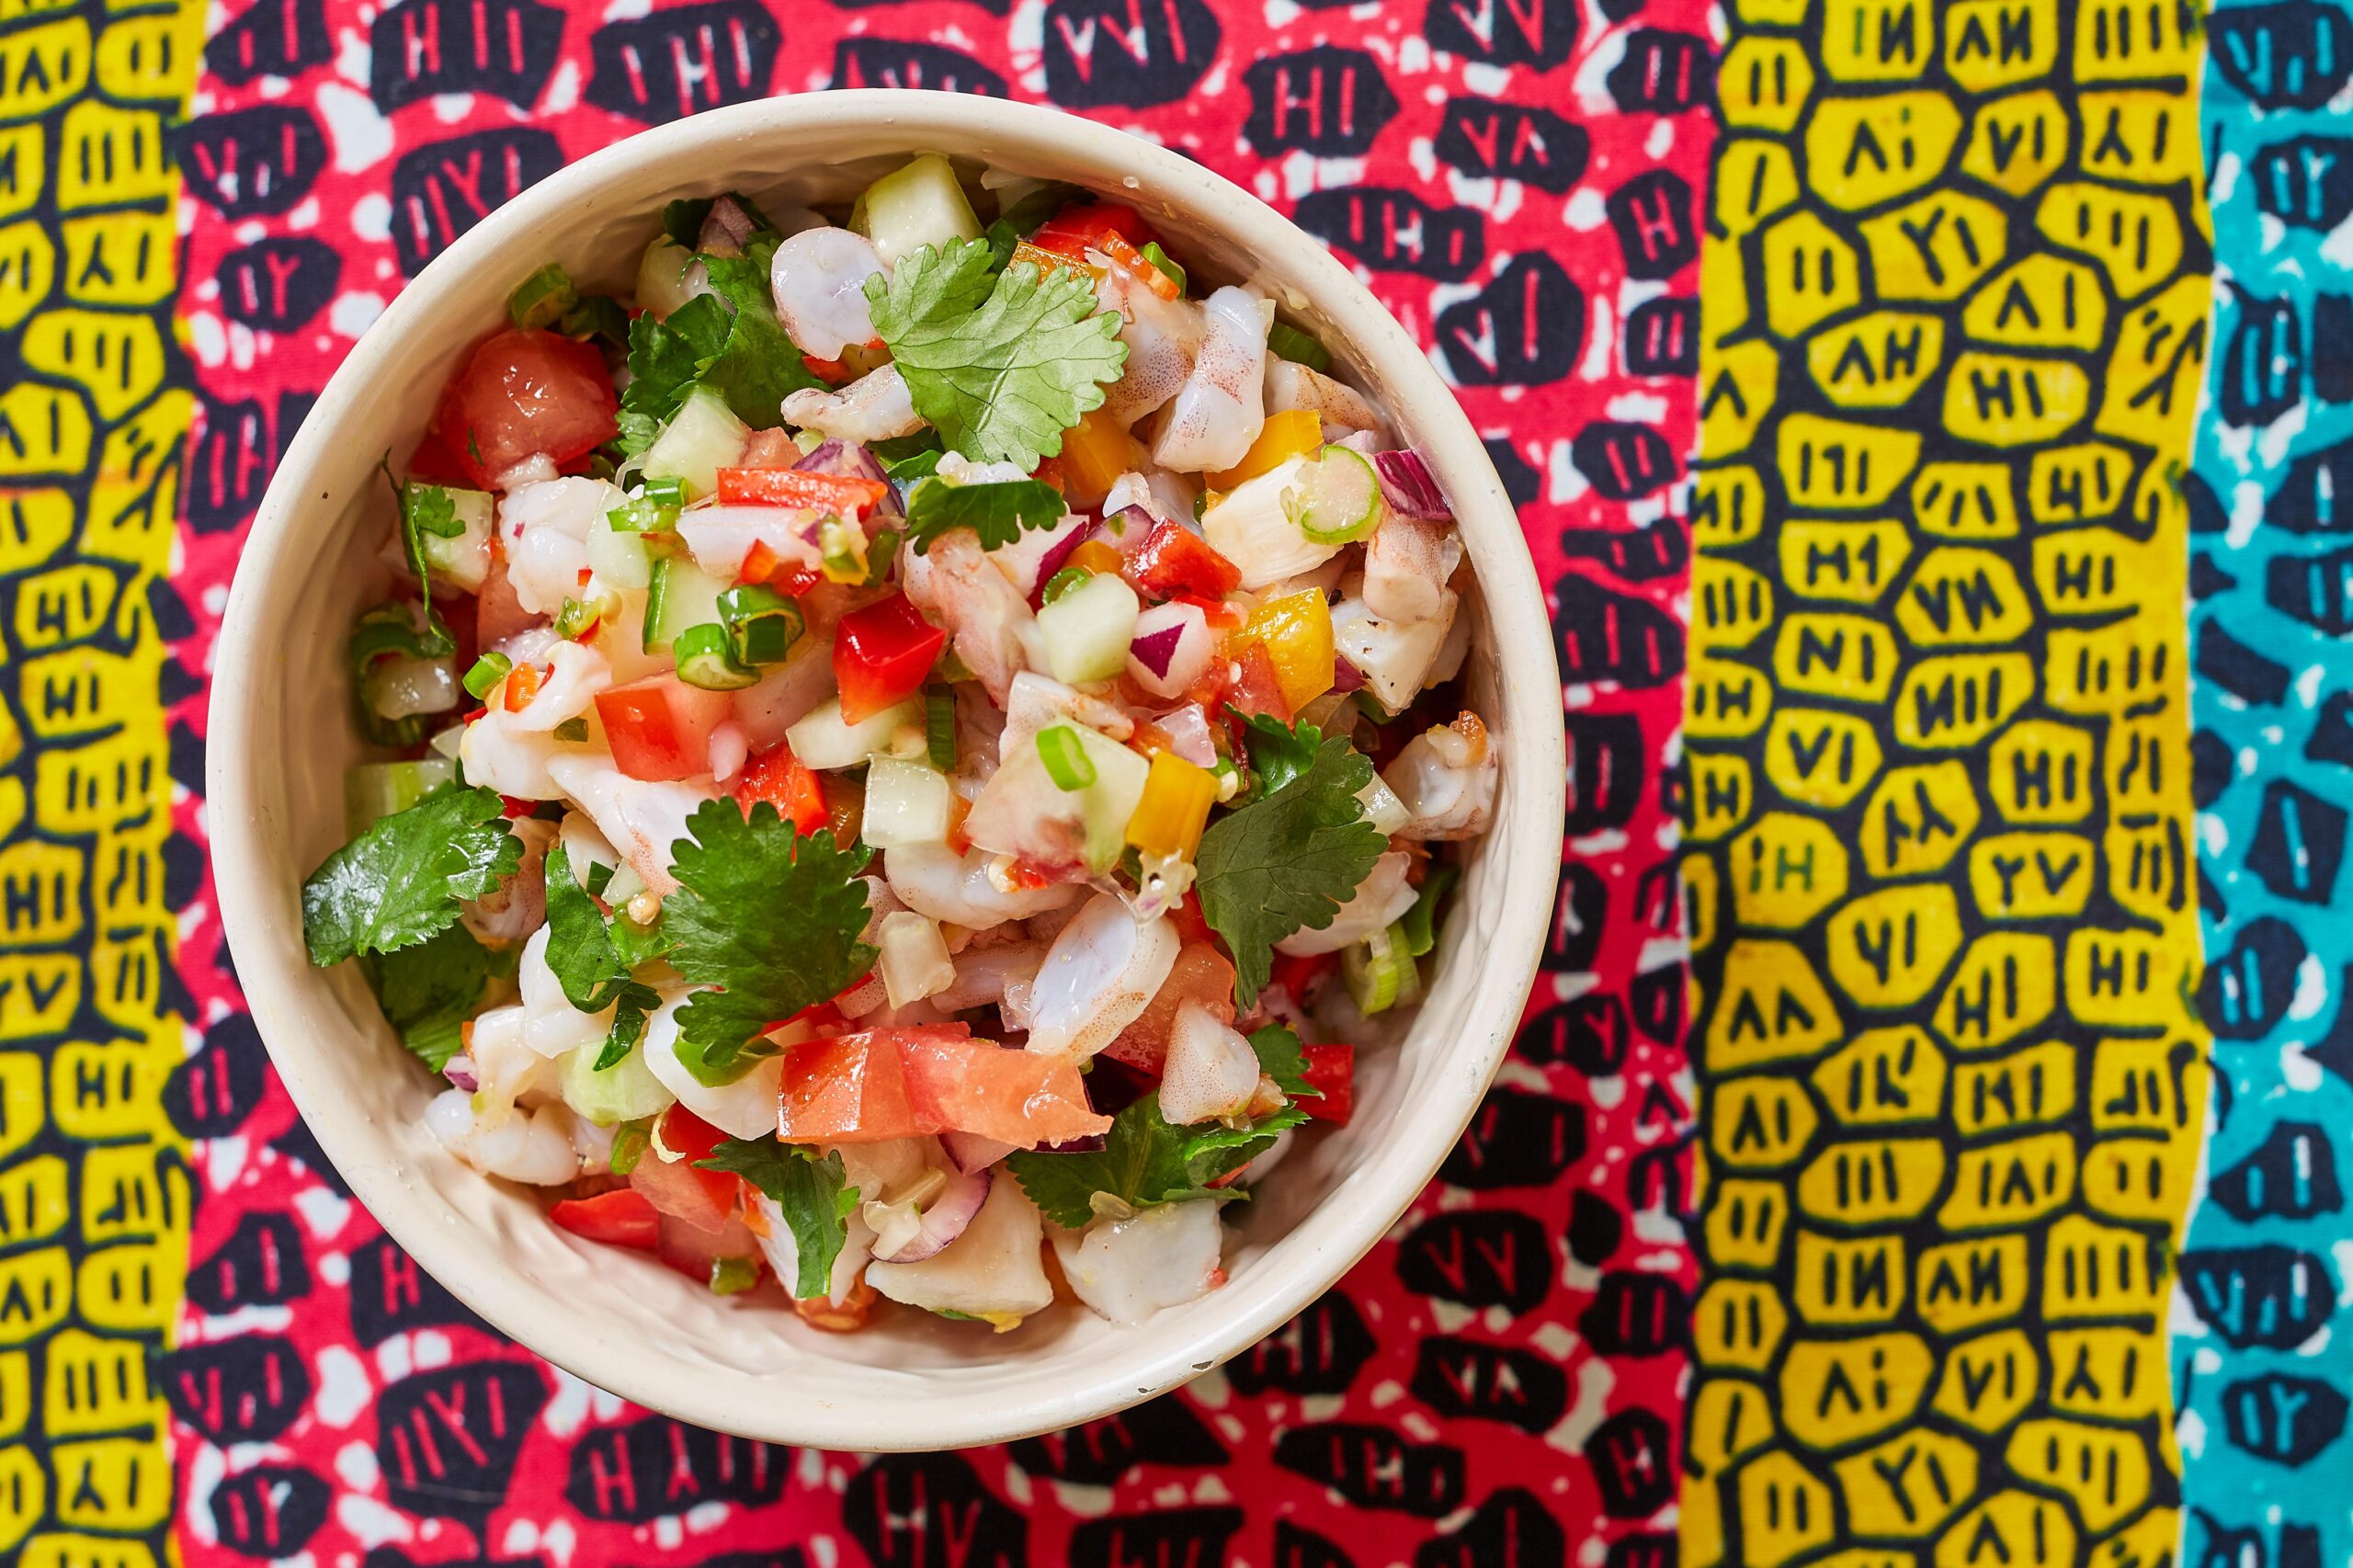  Let the tropical flavors of this ceviche transport you to a beach paradise.